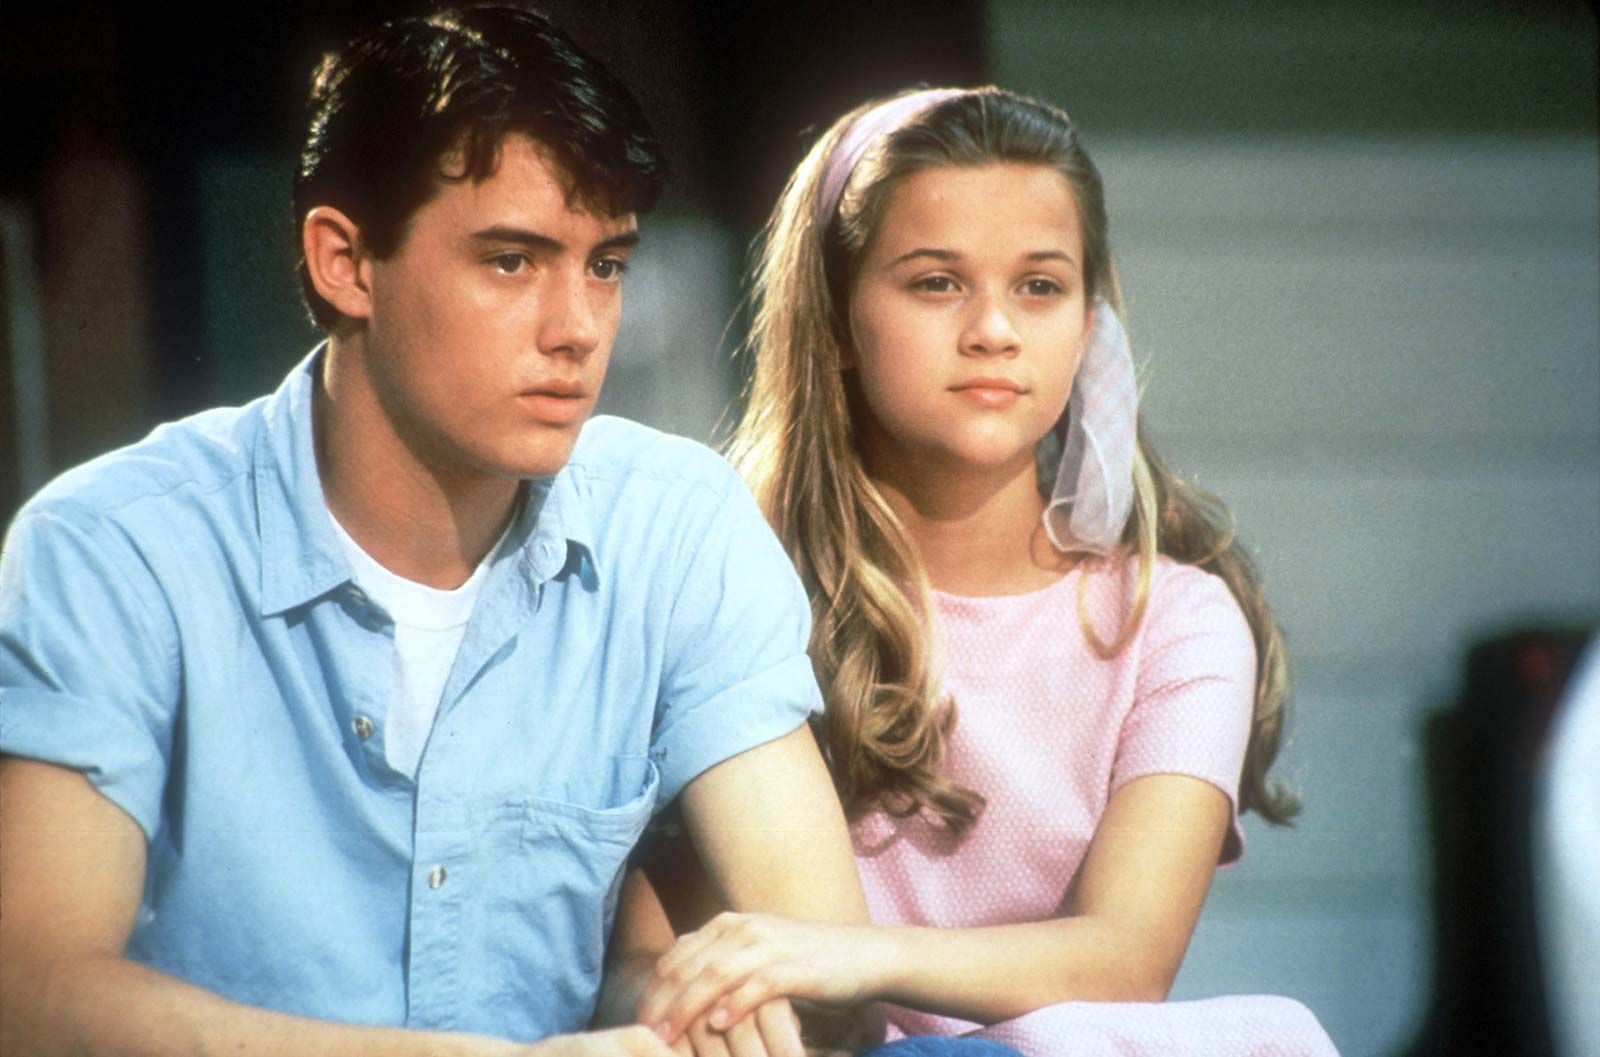 Reese Witherspoon in The Man in the Moon (Image via MGM)